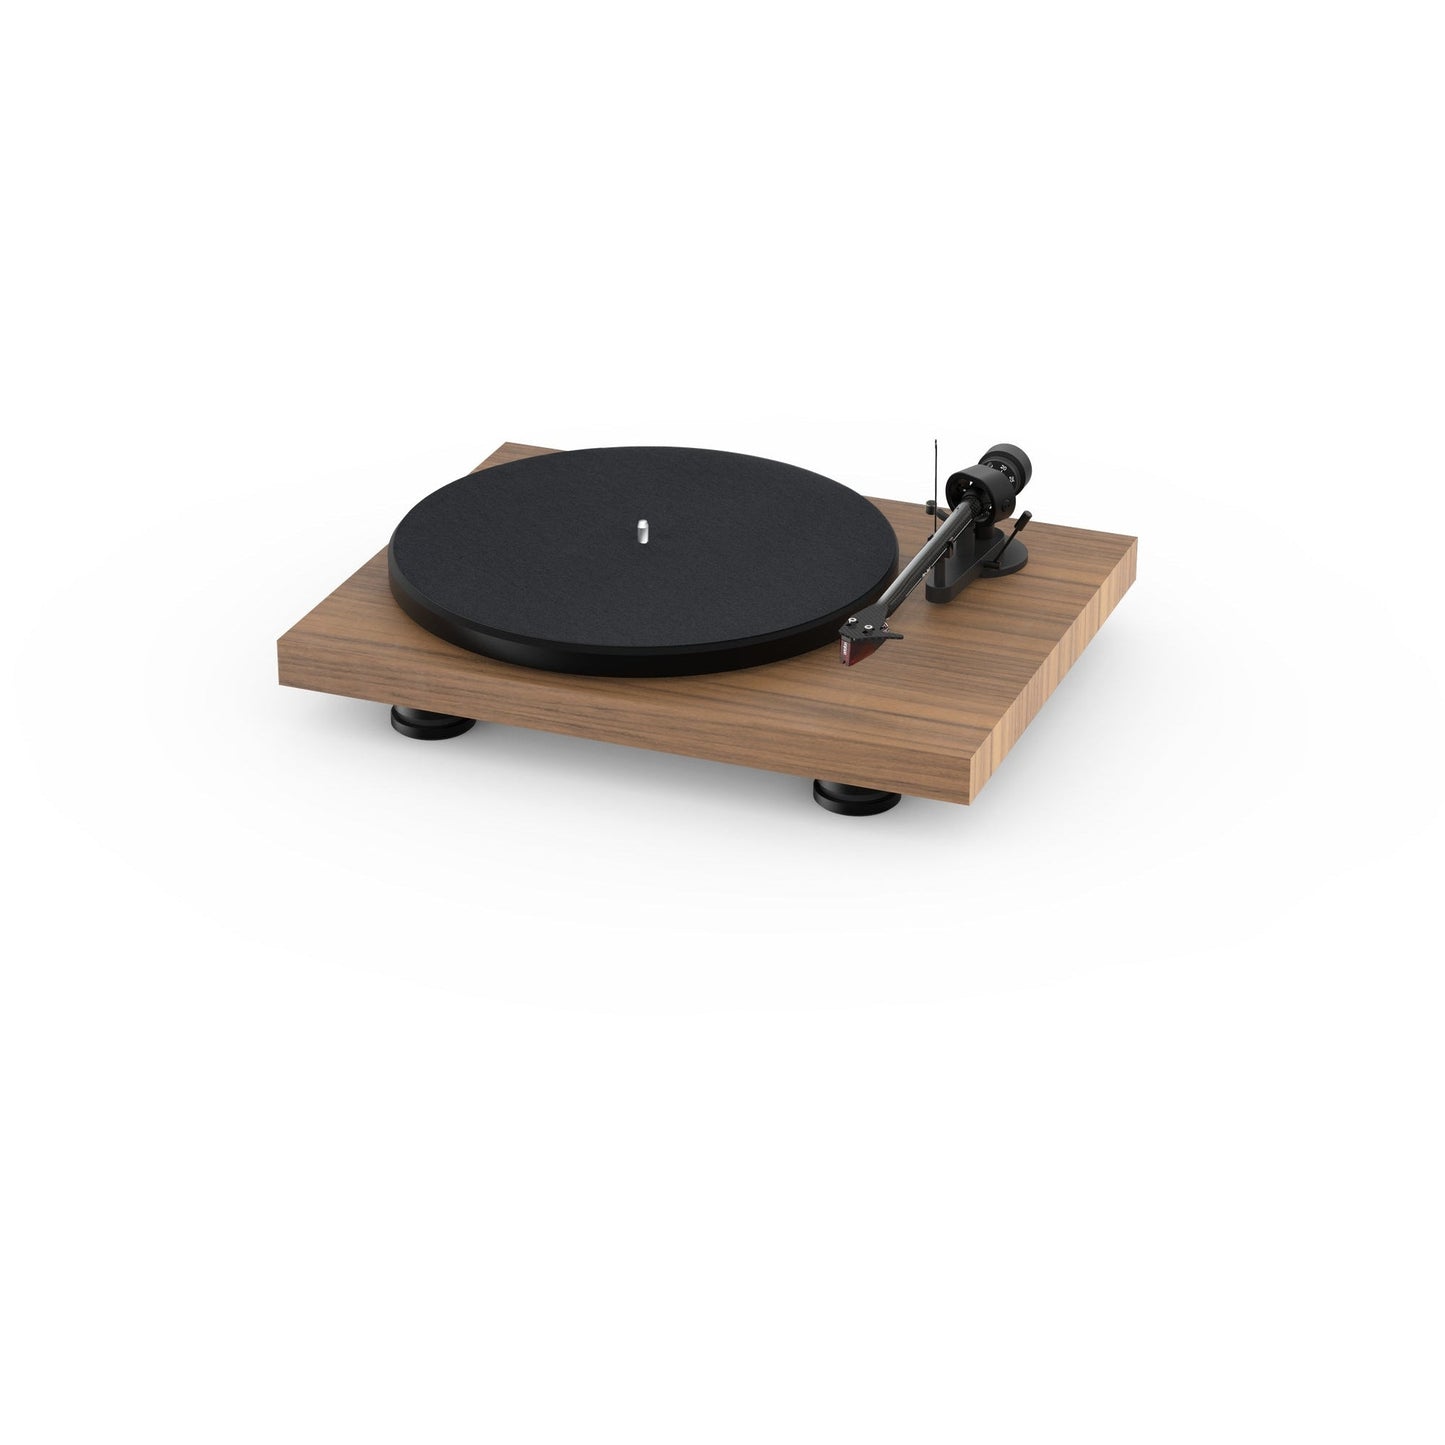 Pro-Ject Debut Carbon Evo Turntable-Pro-Ject-Mood